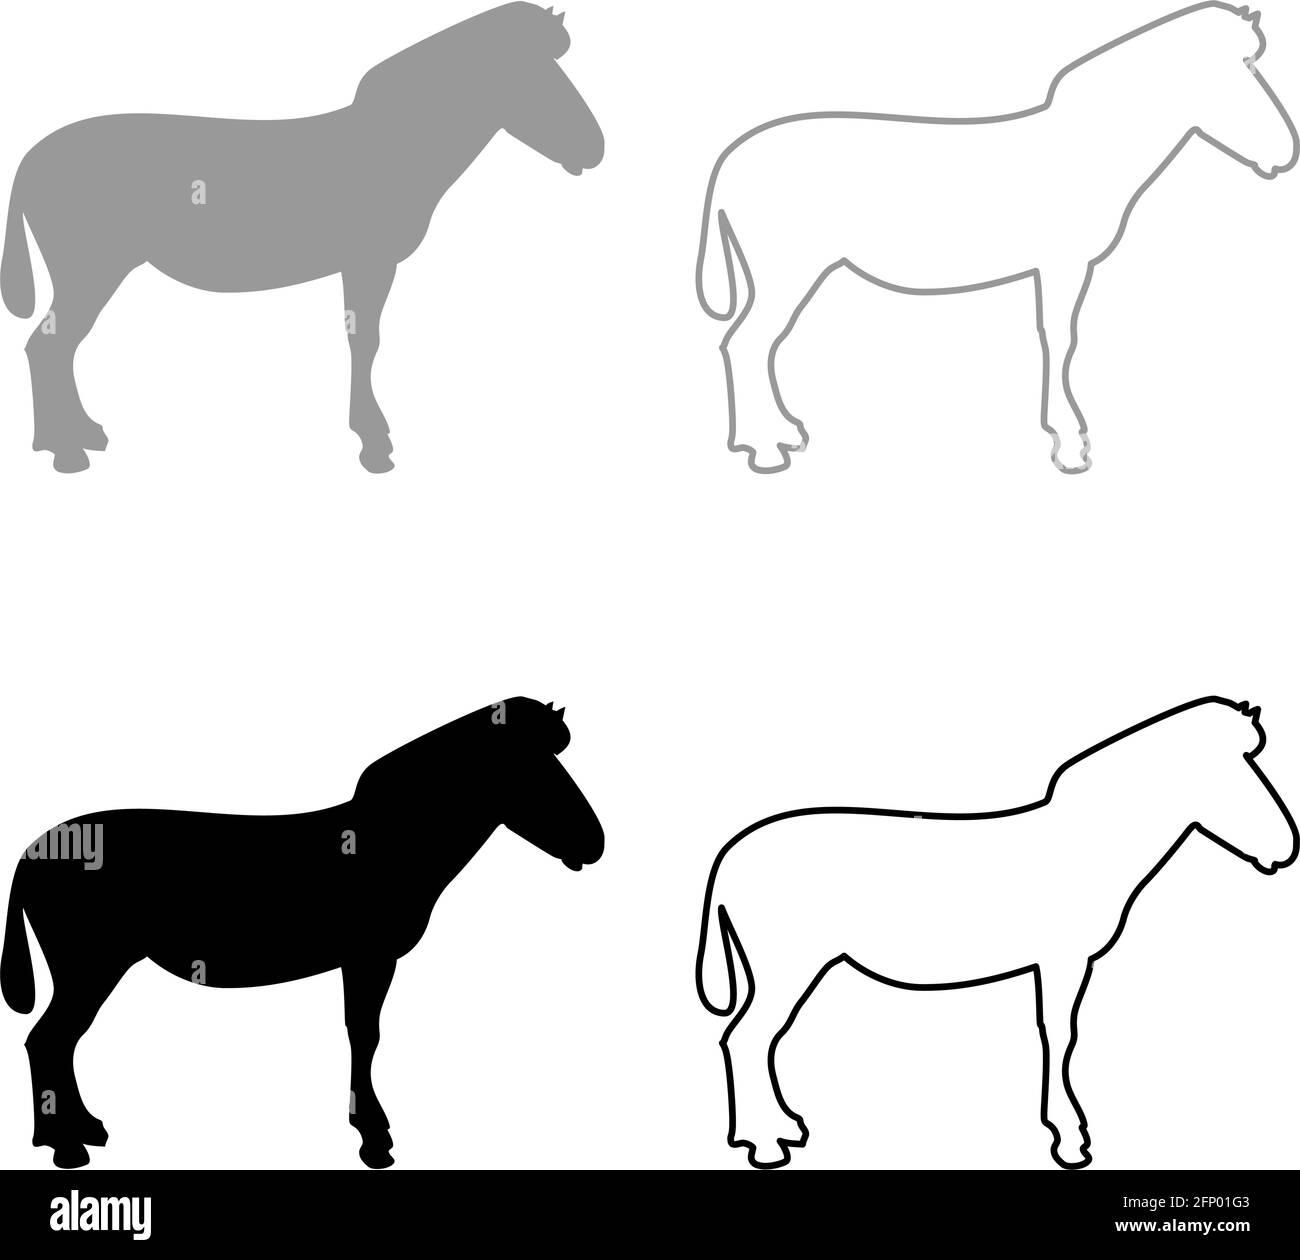 Zebra stand Animal standing silhouette grey black color vector illustration solid outline style simple image Stock Vector